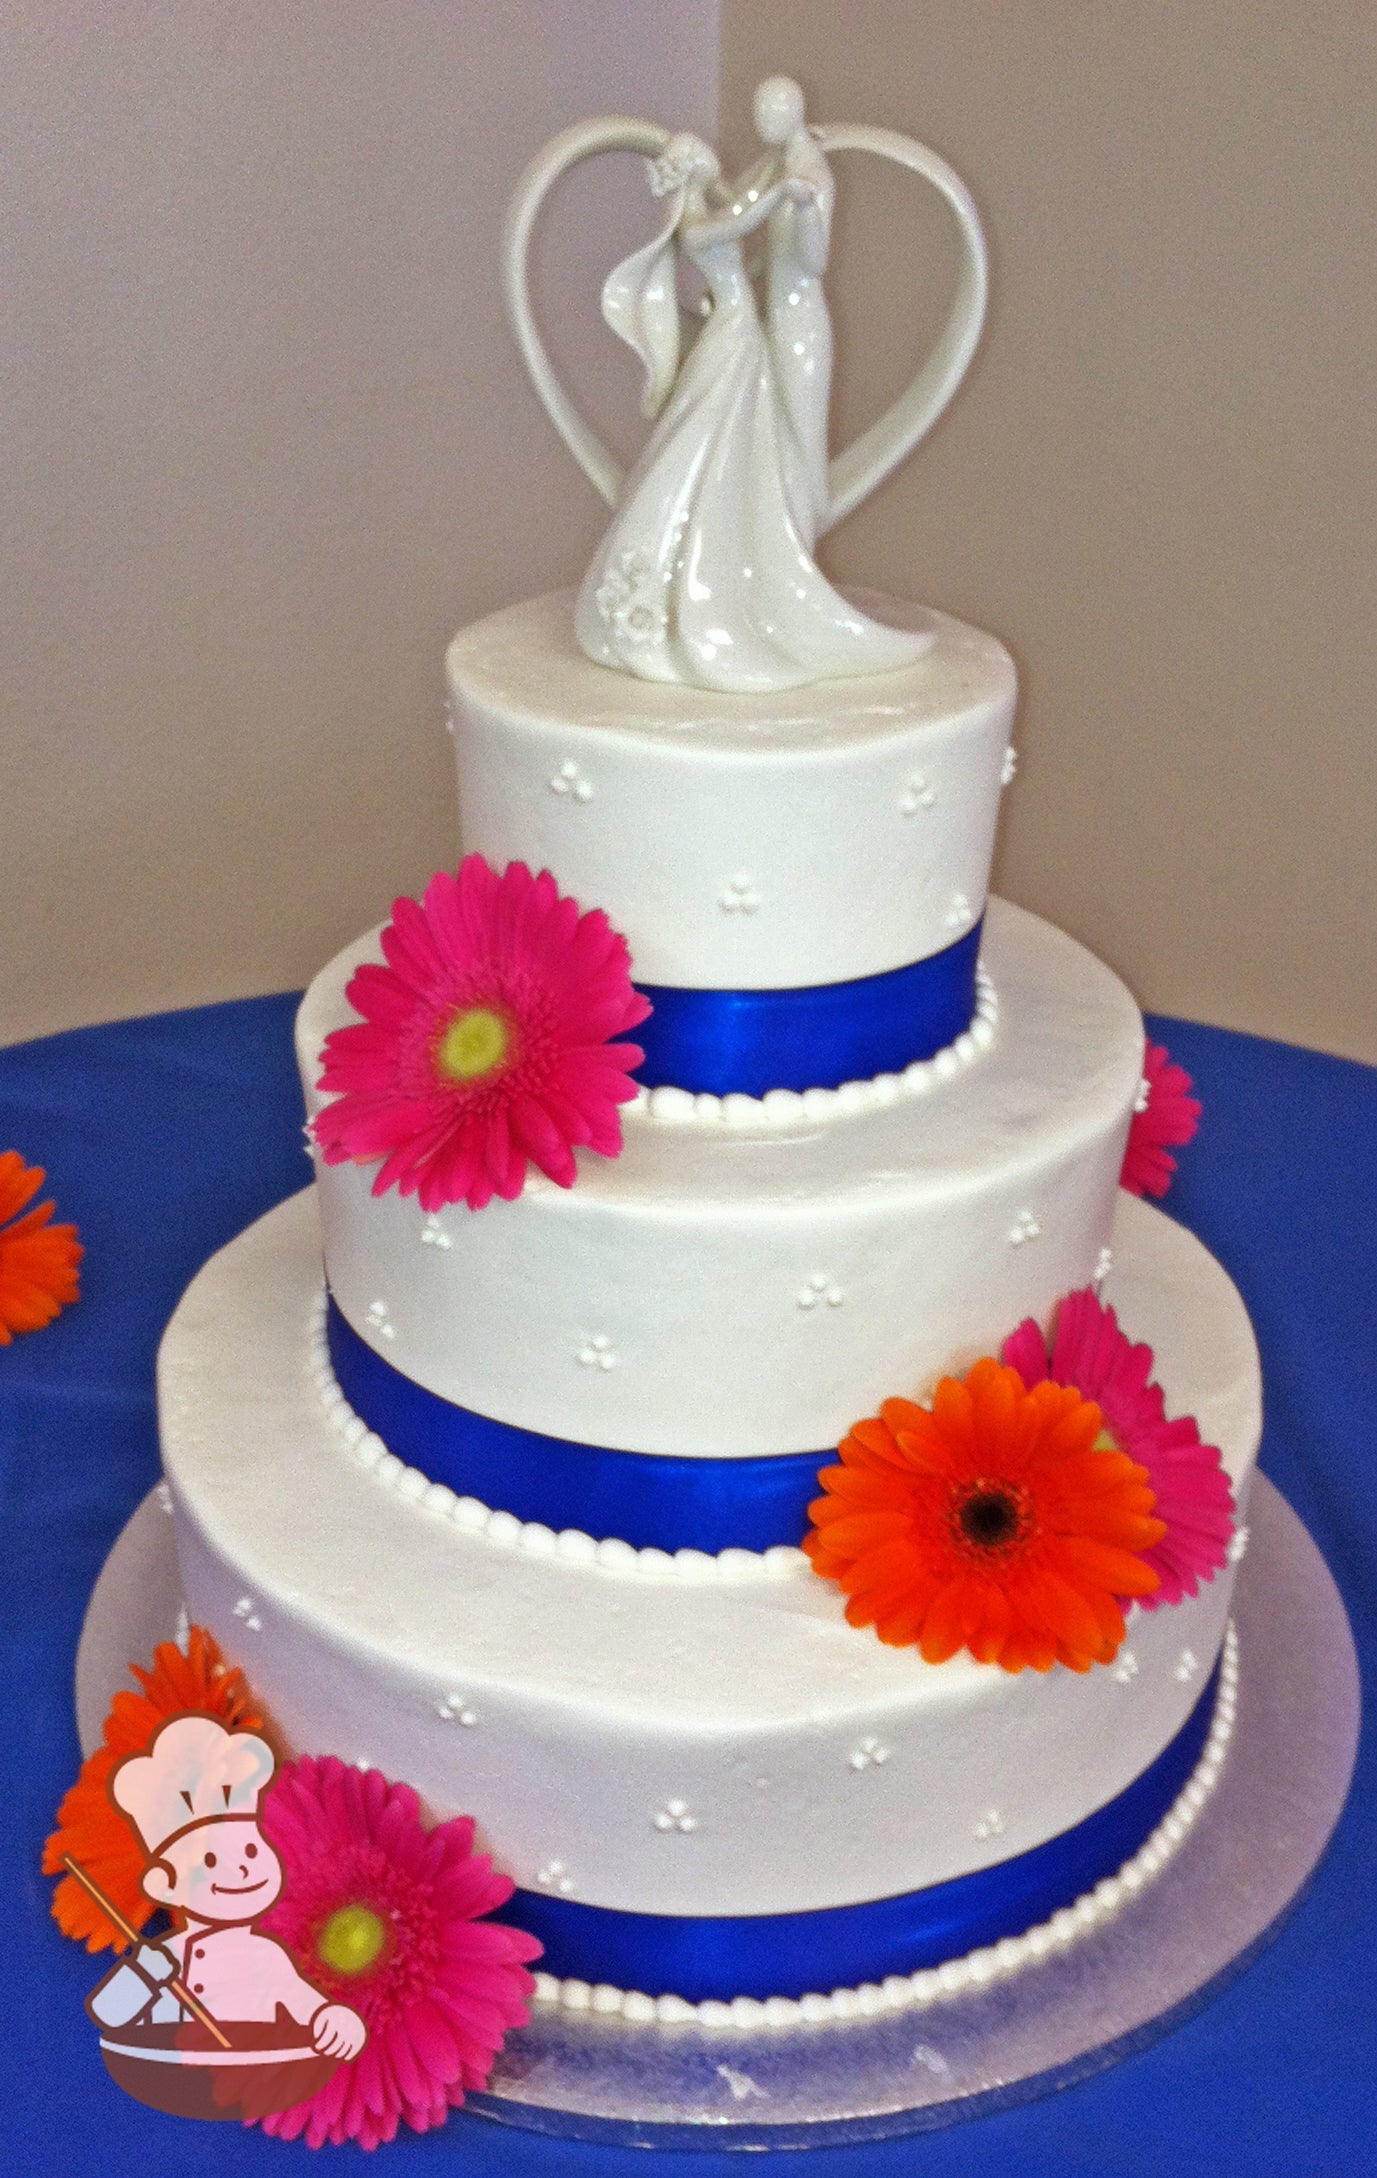 3-tier cake with smooth white icing and decorated with white buttercream tridot piping's and a royal-blue satin ribbon on the base of each tier.